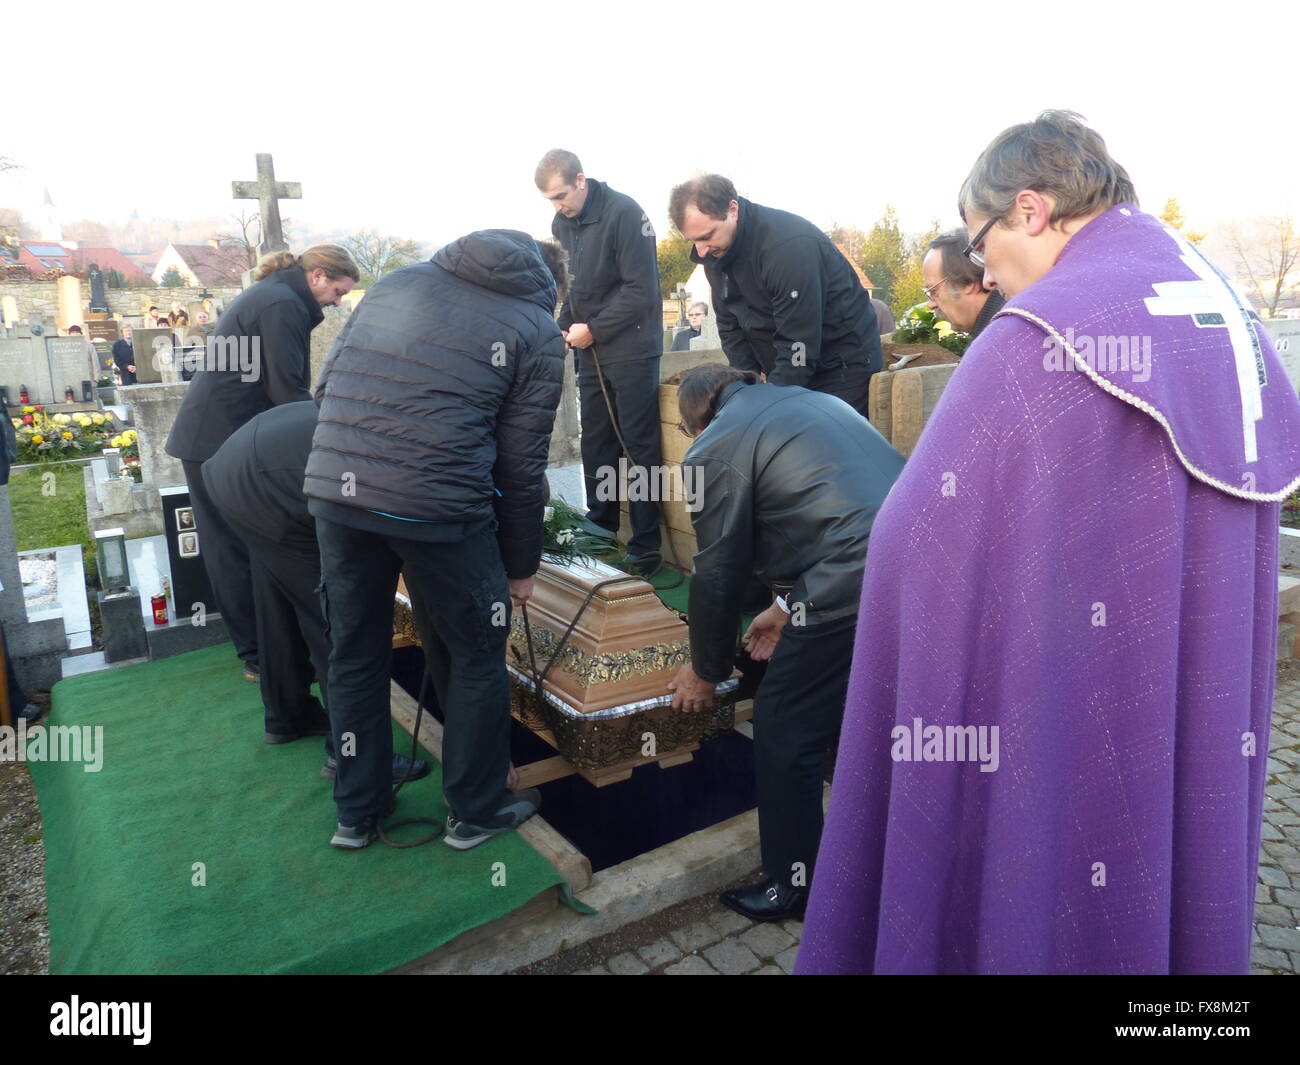 Lowering casket into grave at country funeral Stock Photo